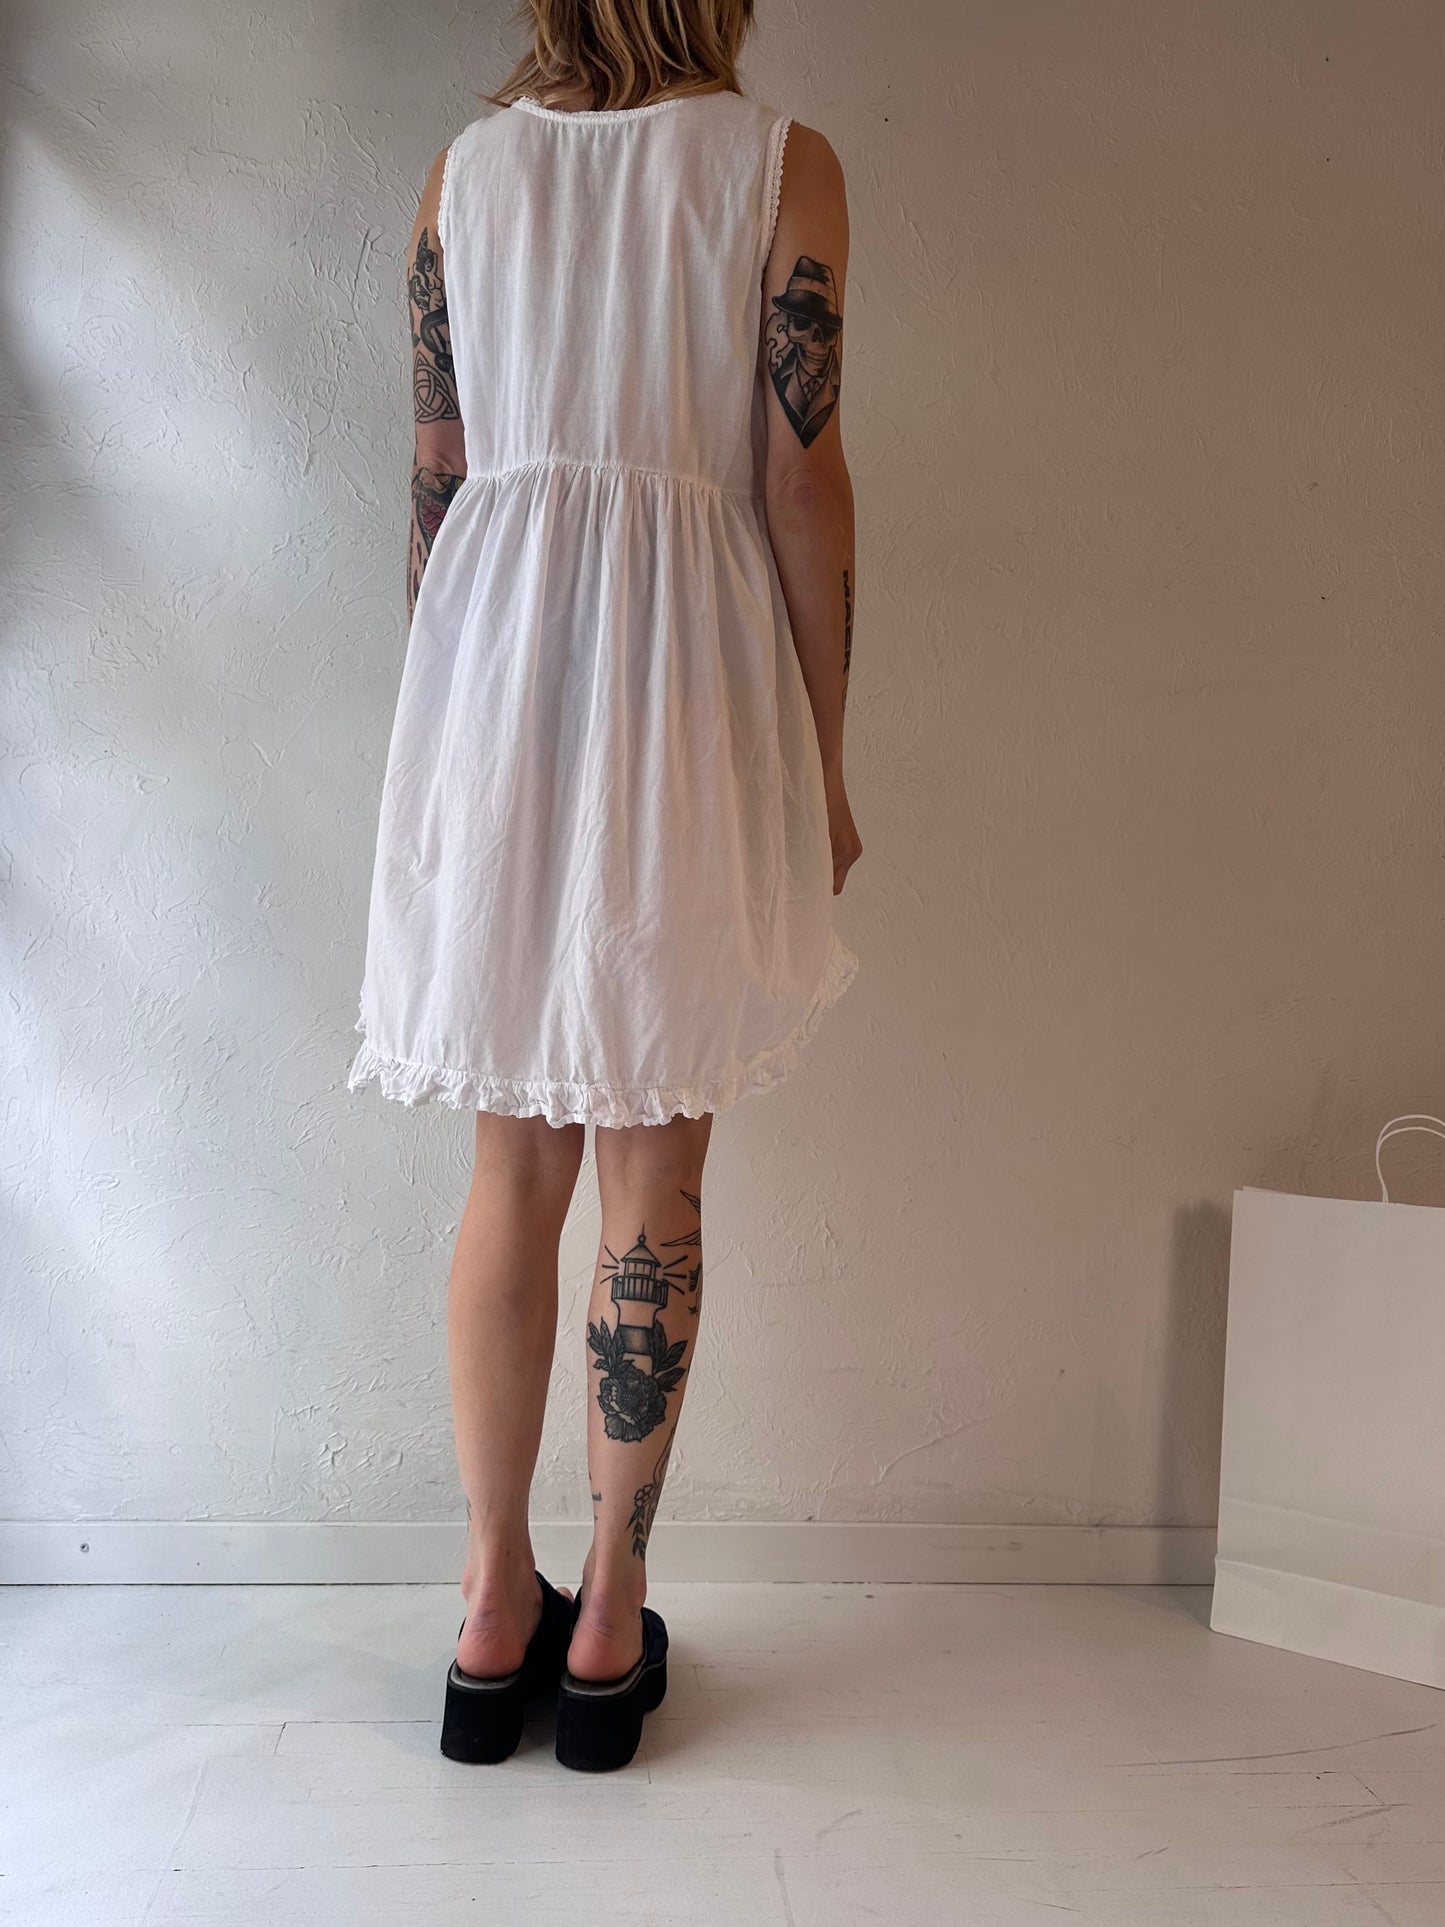 90s 'For The Home' White Cotton Dress / Large